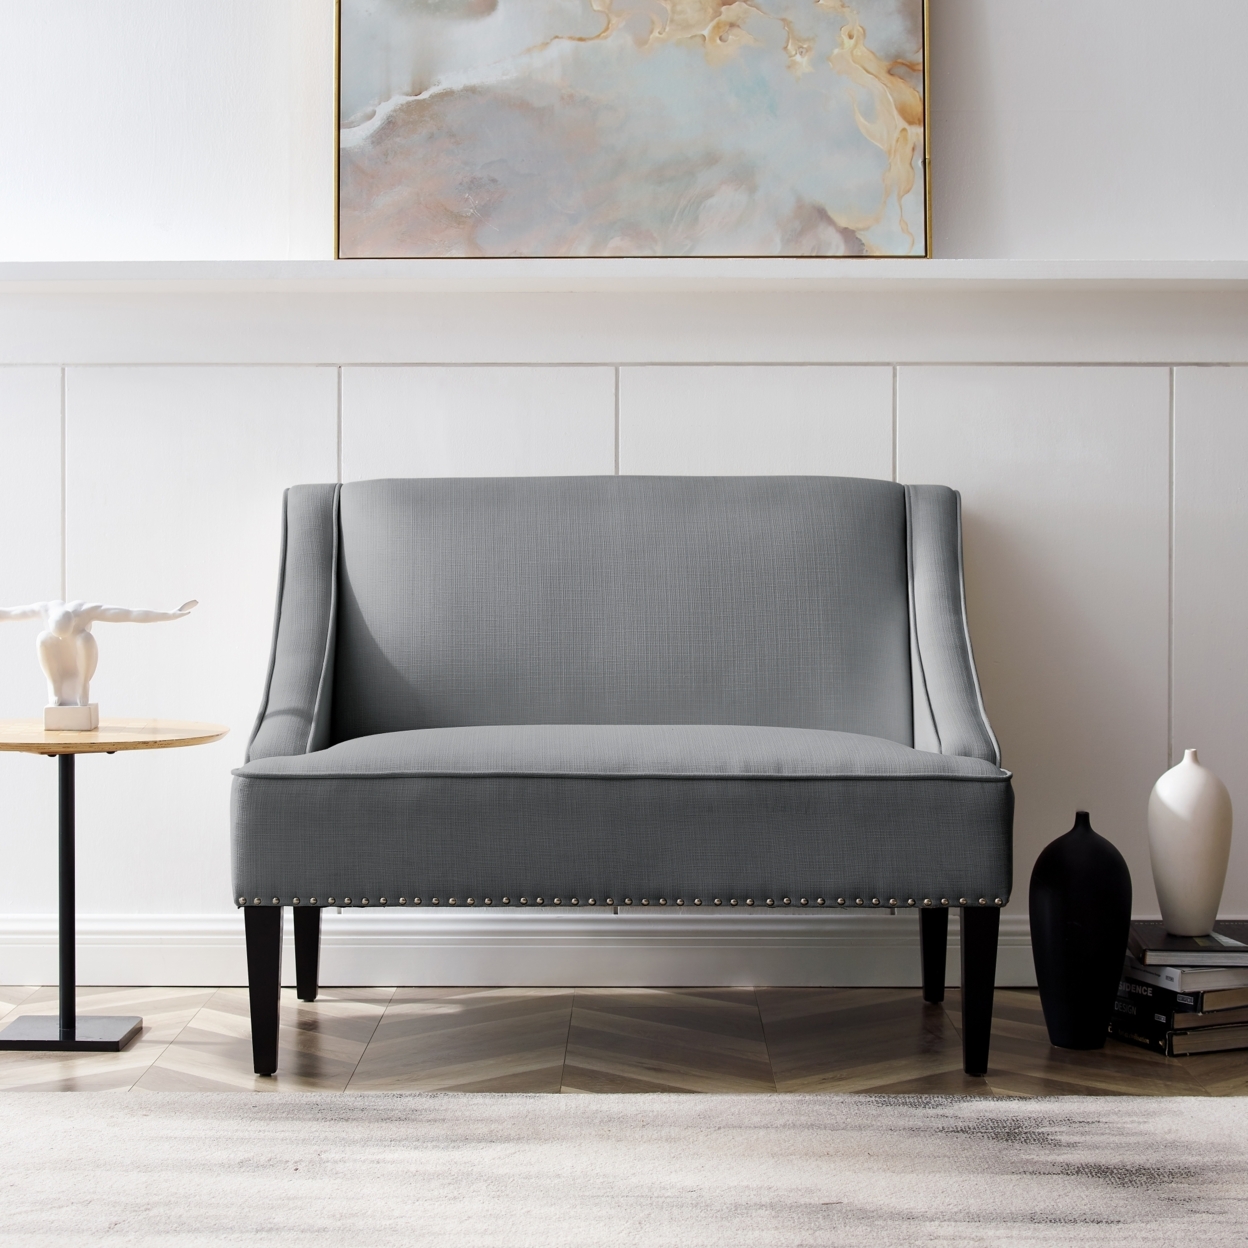 Janessa Linen Bench - Upholstered With Swoop Arms - Light Grey